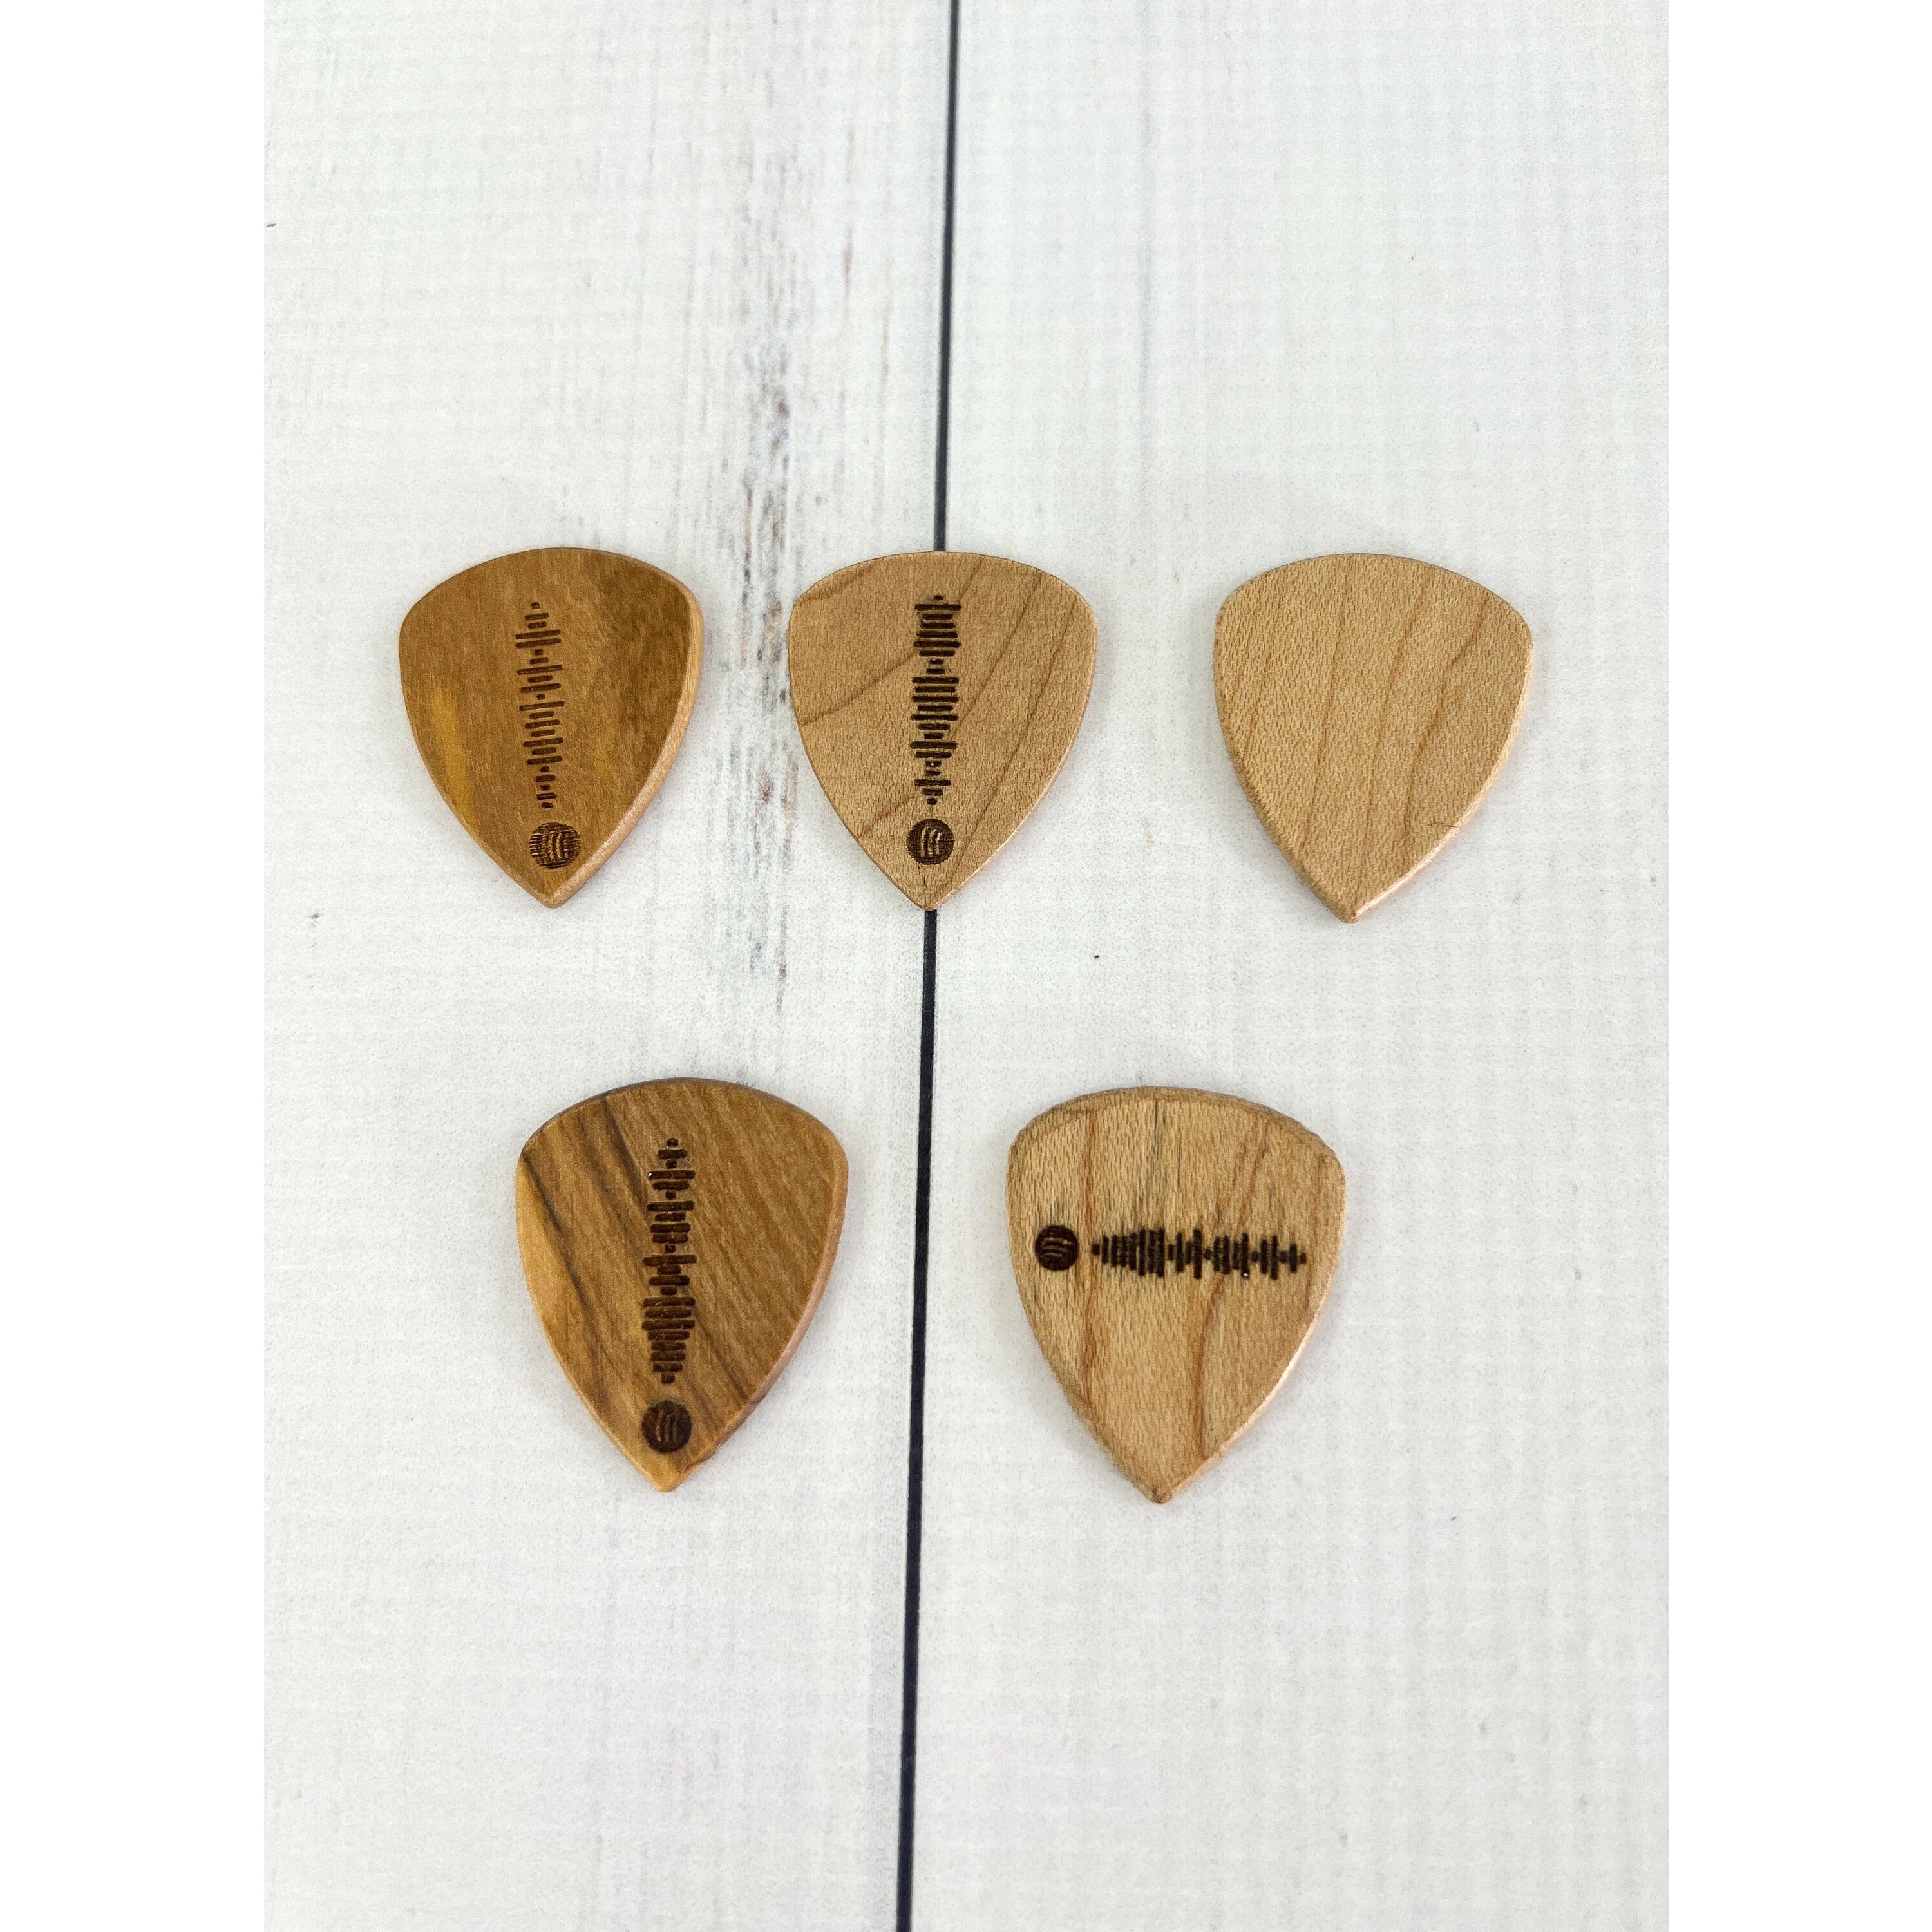 Personalized Guitar Pick Holder Keychain With Custom Wooden Guitar Pick